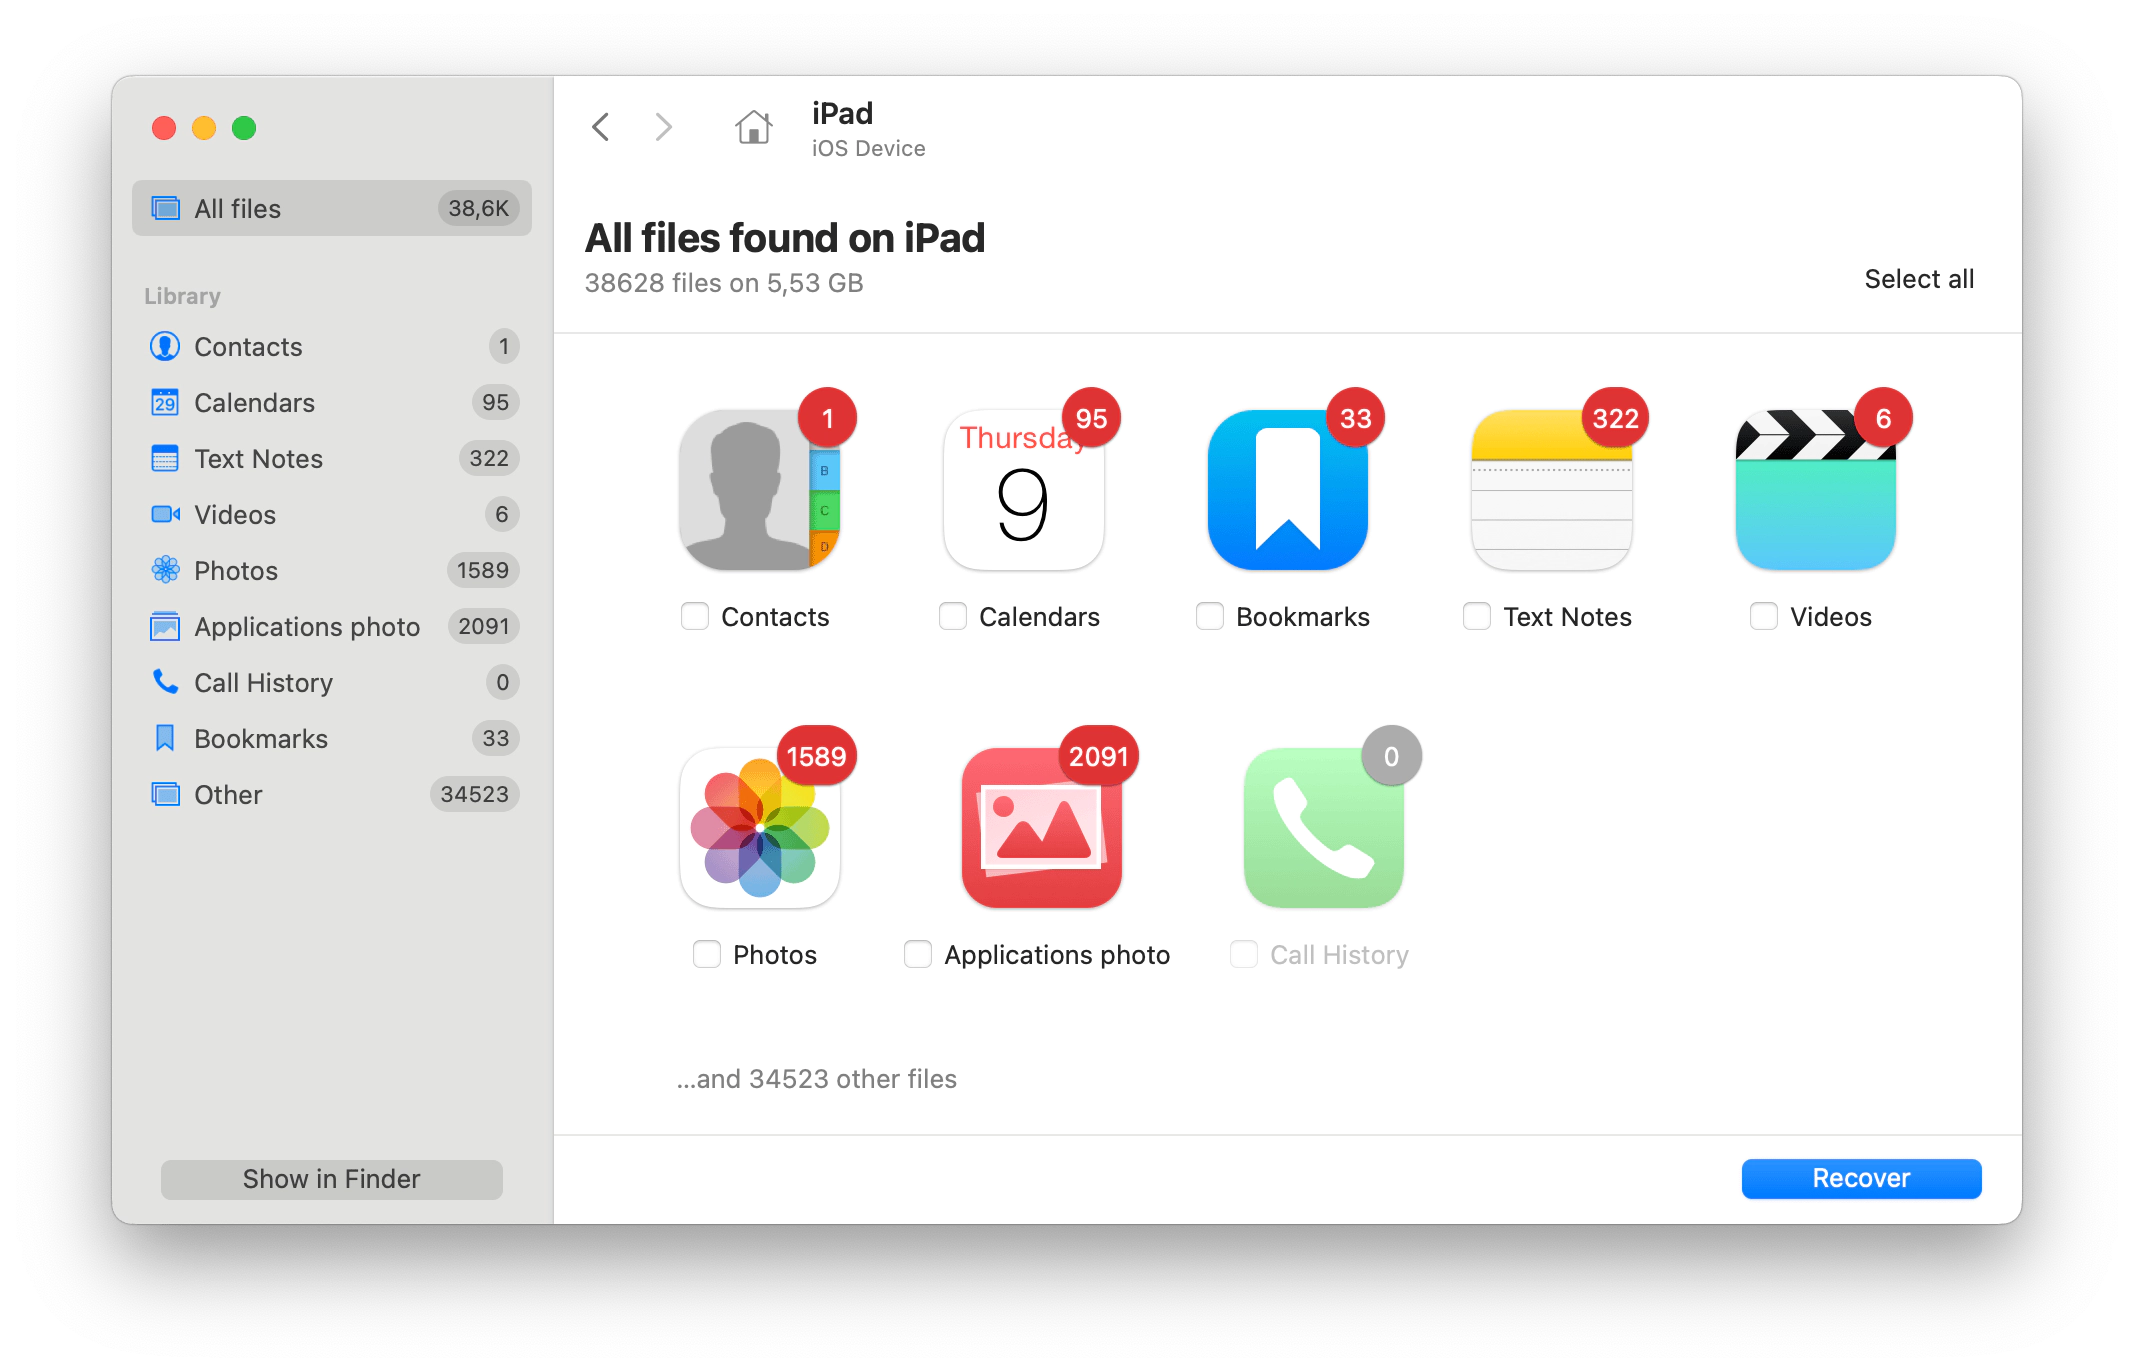 All files available to recover on iPad